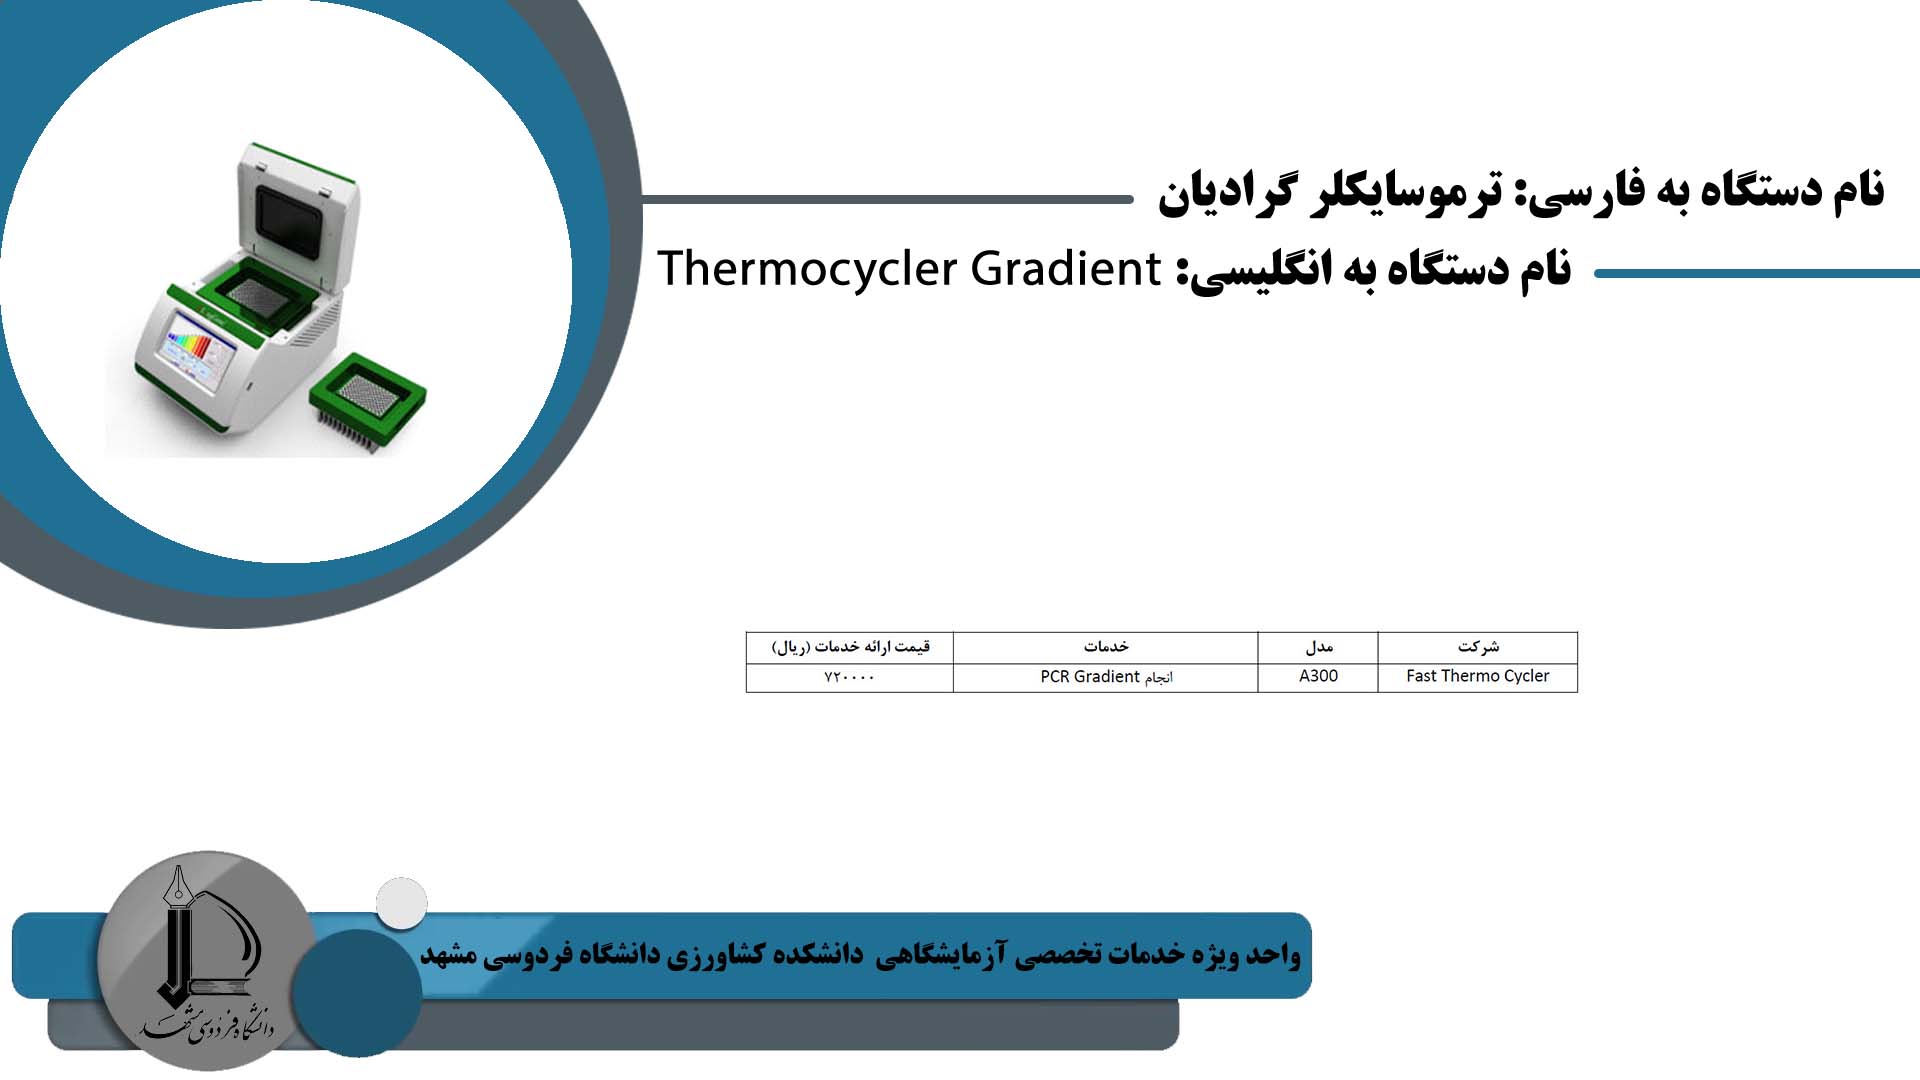 Thermocycler Gradient